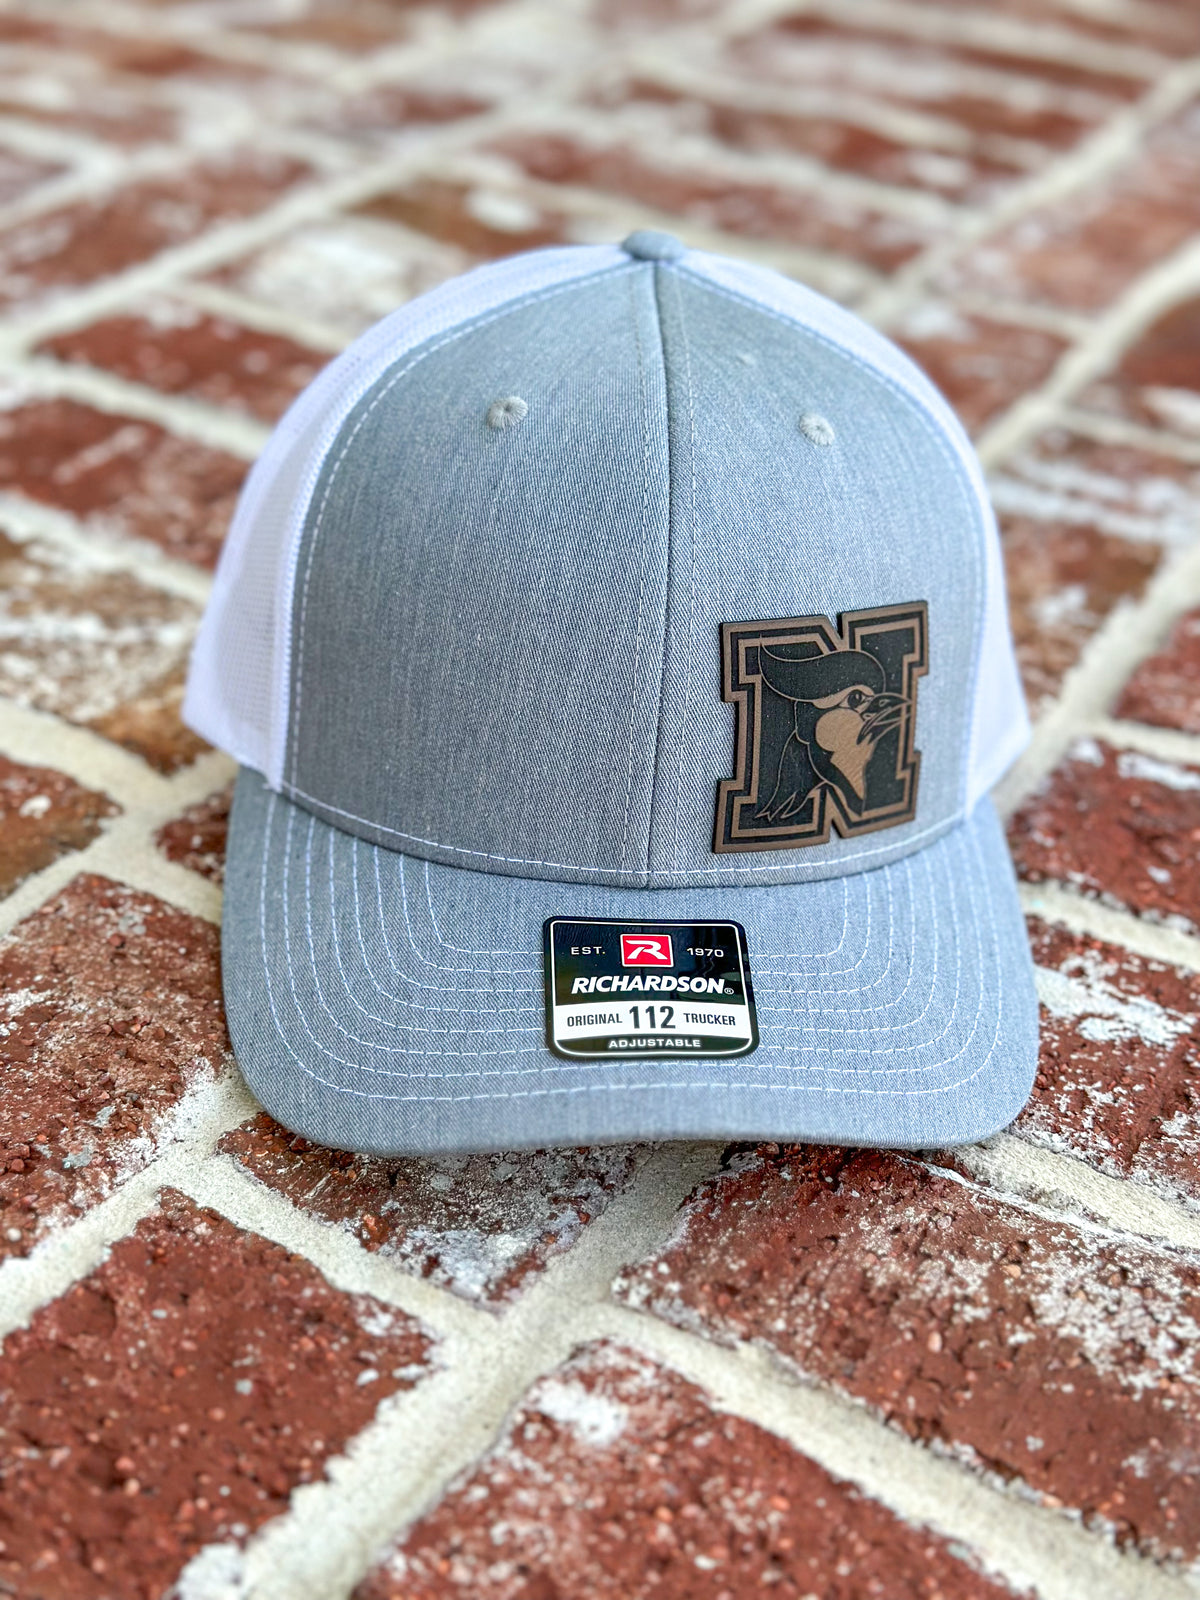 needville N patch hat 